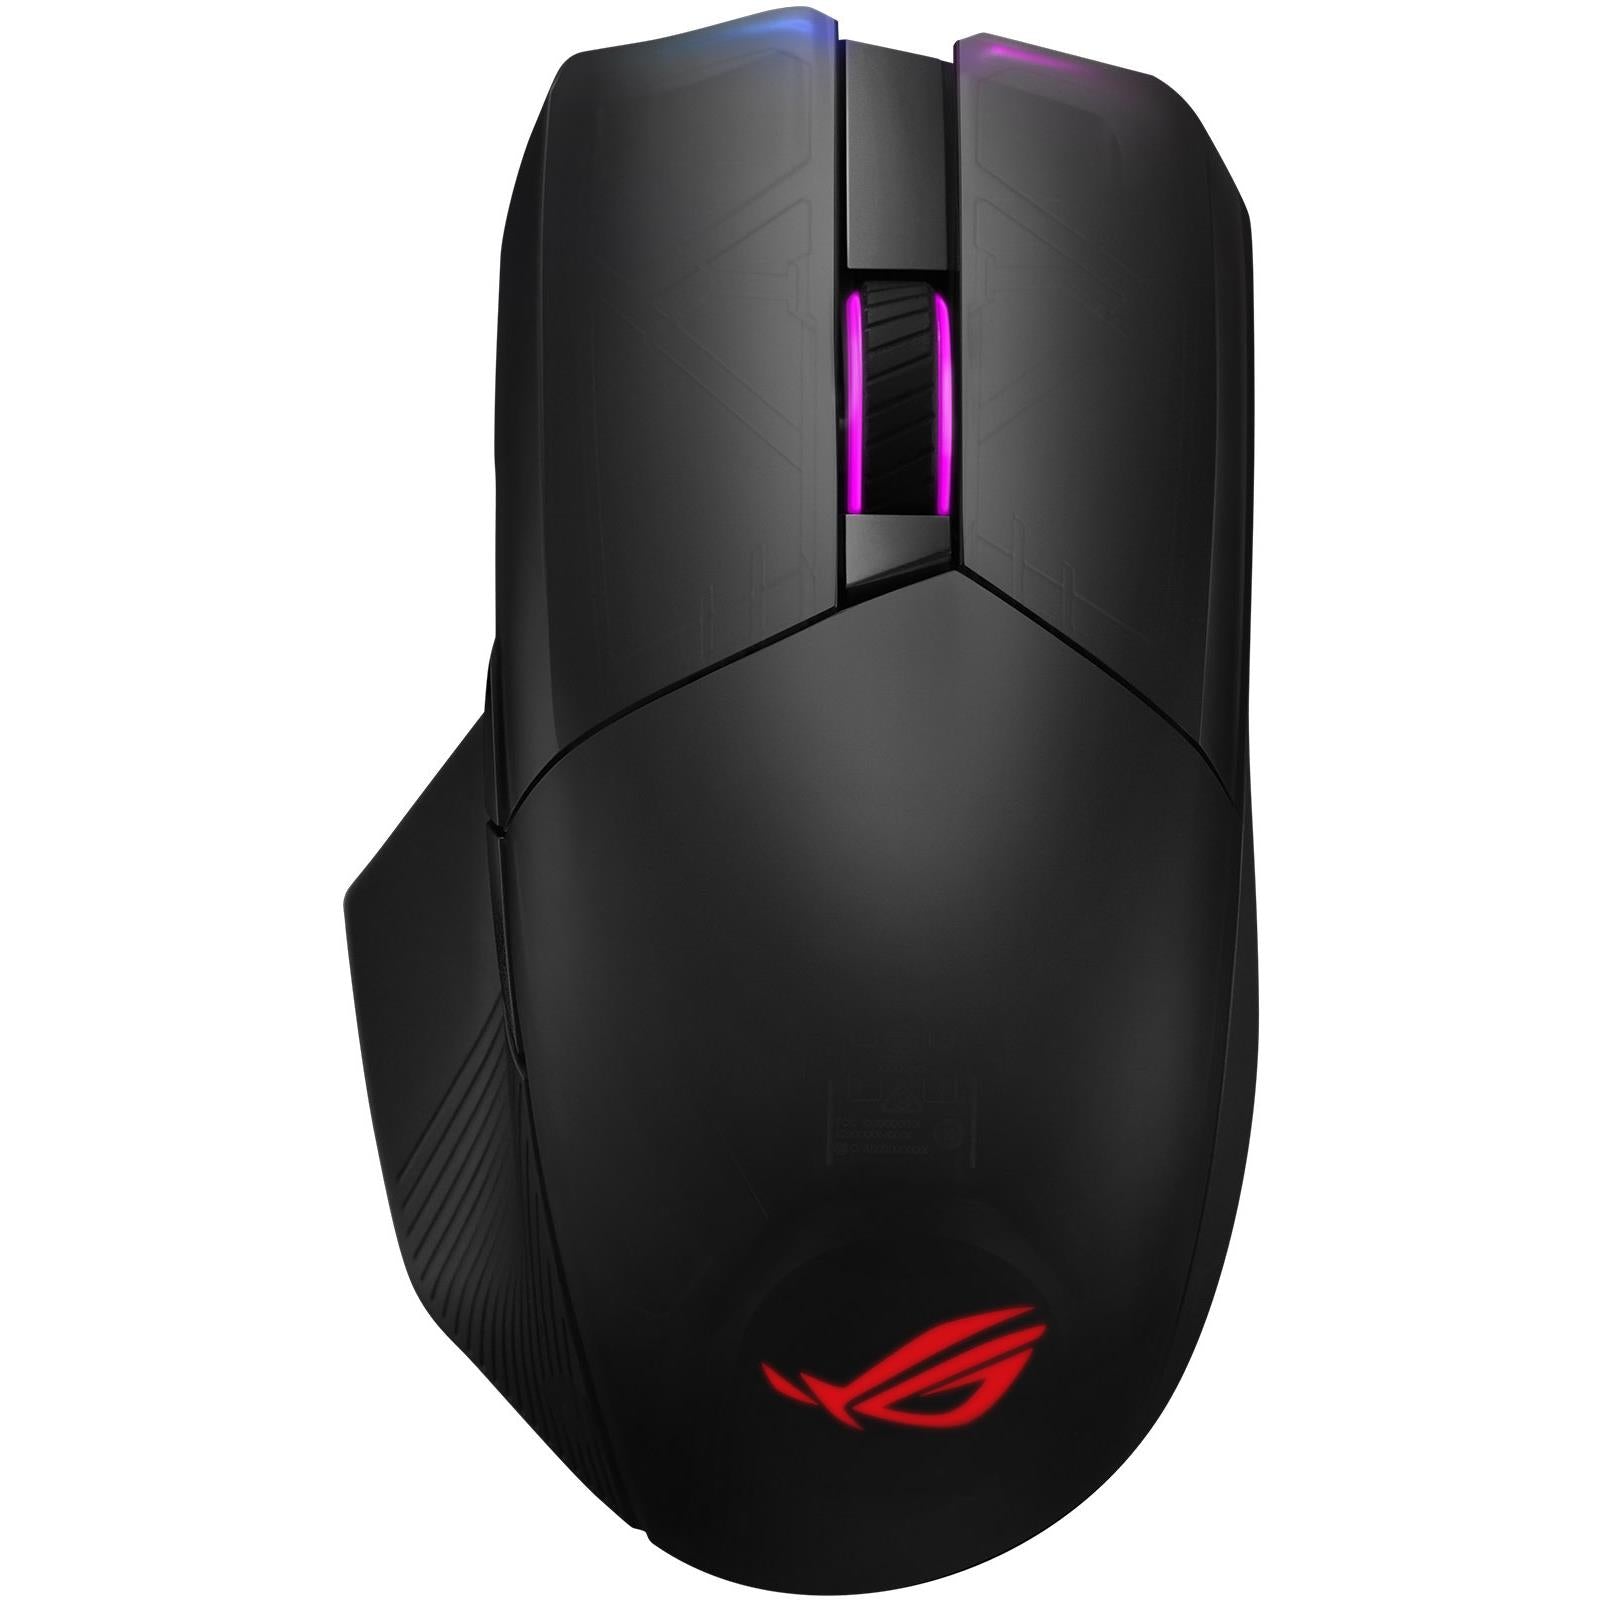 asus rog chakram wireless gaming mouse with qi charging